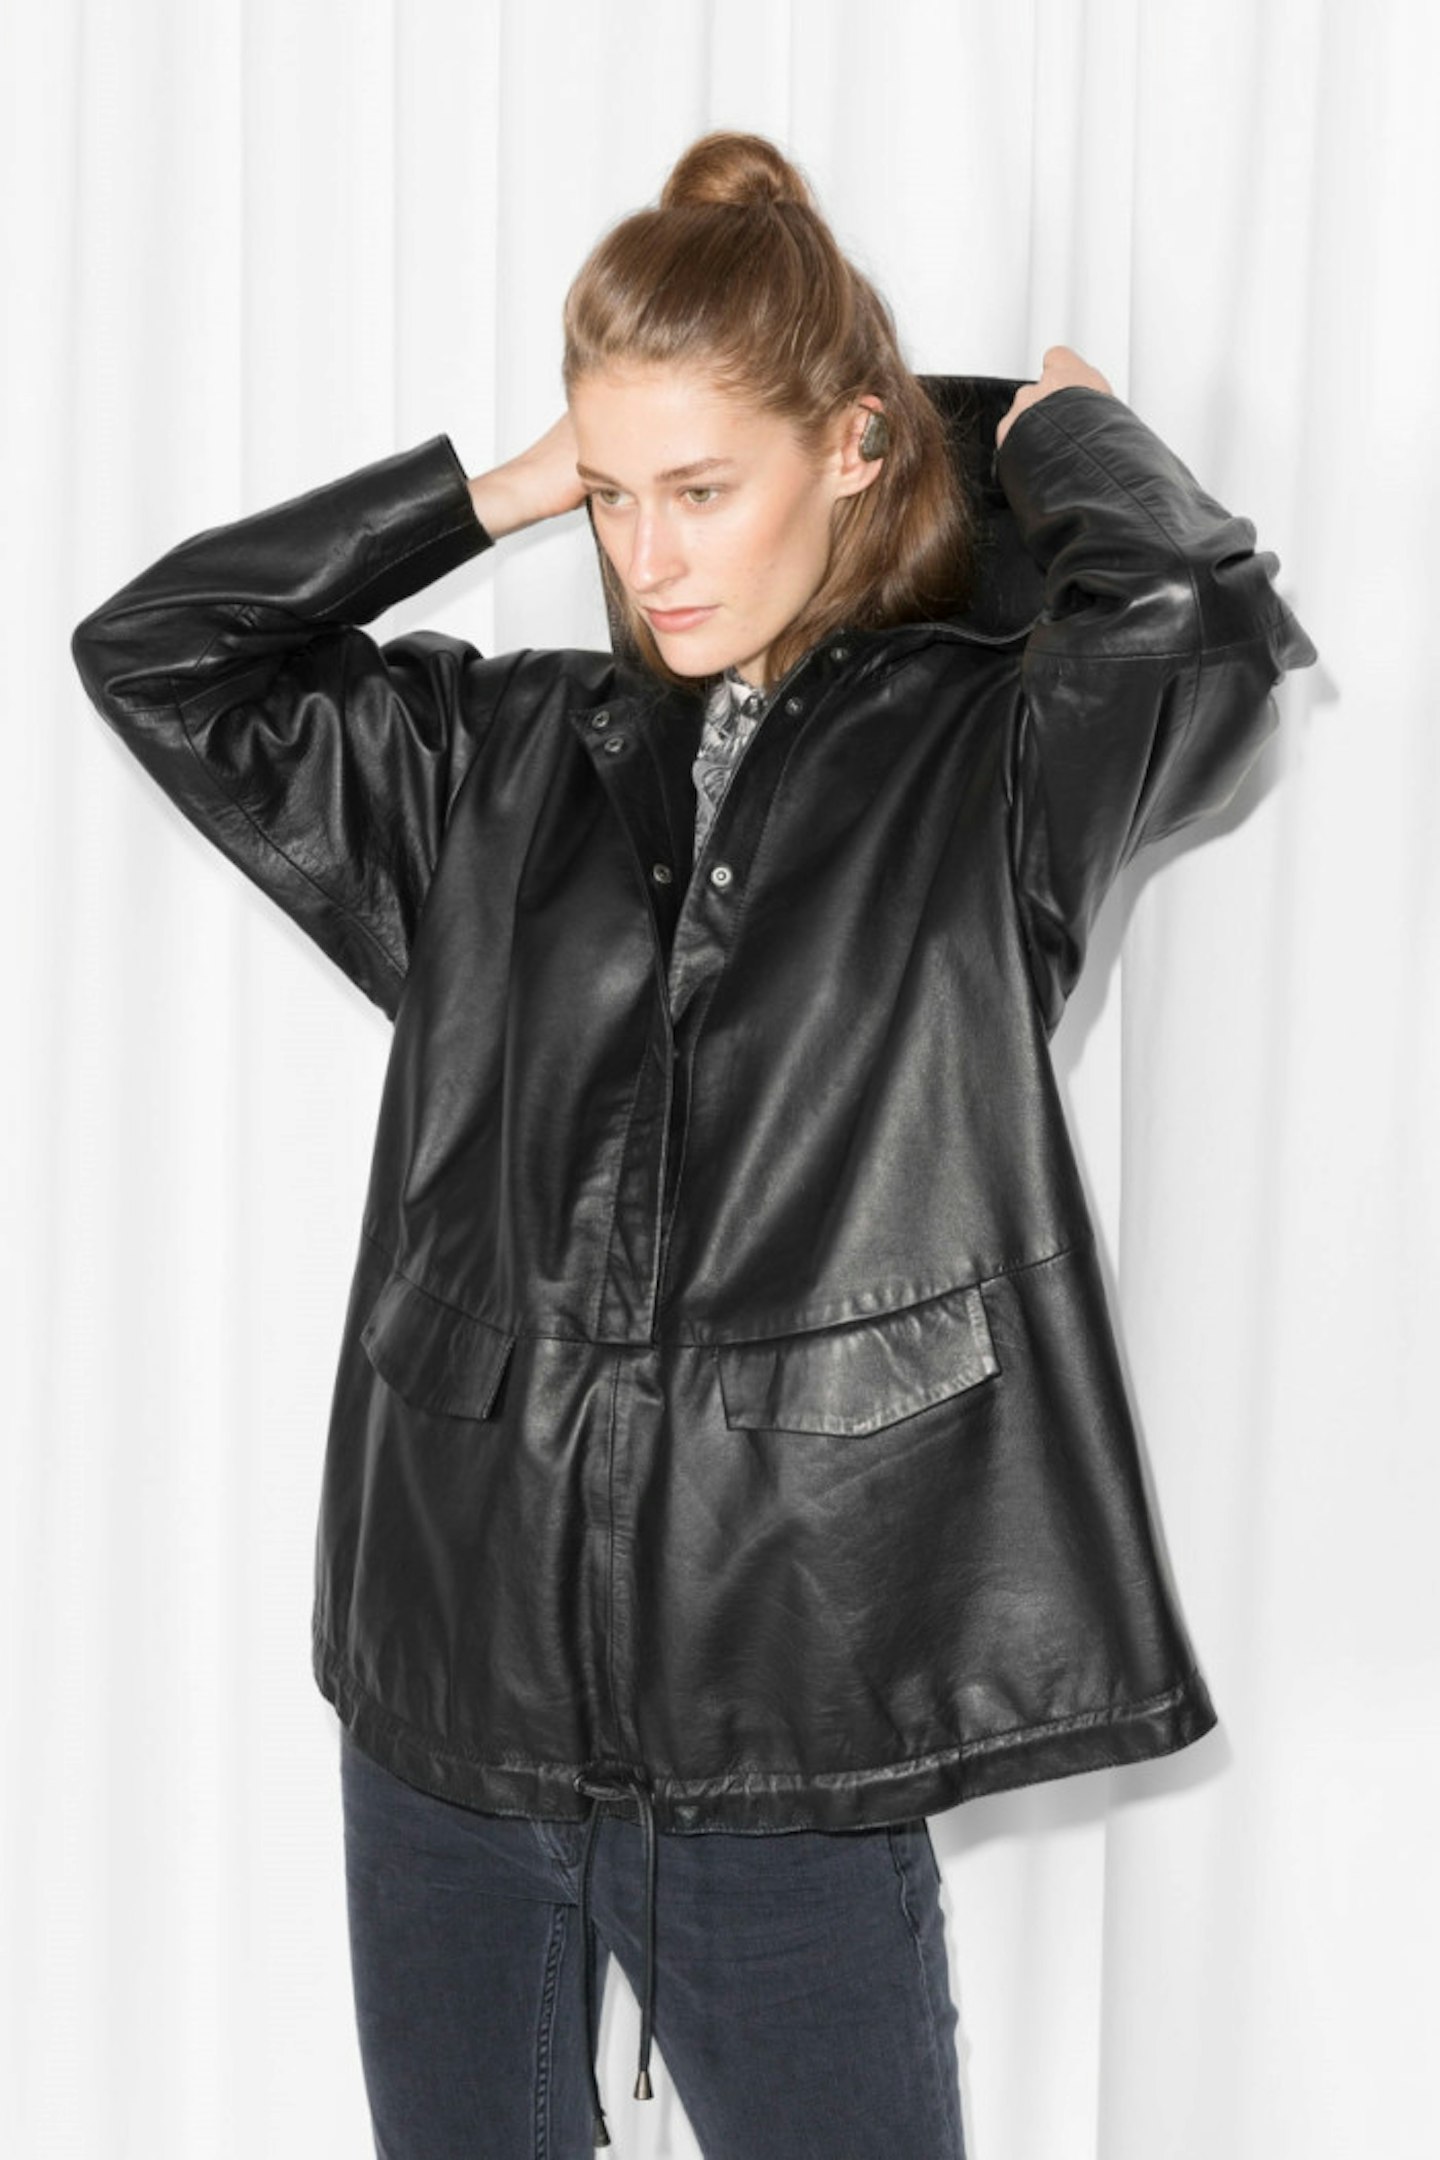 & Other Stories Leather Anorak, £245.00